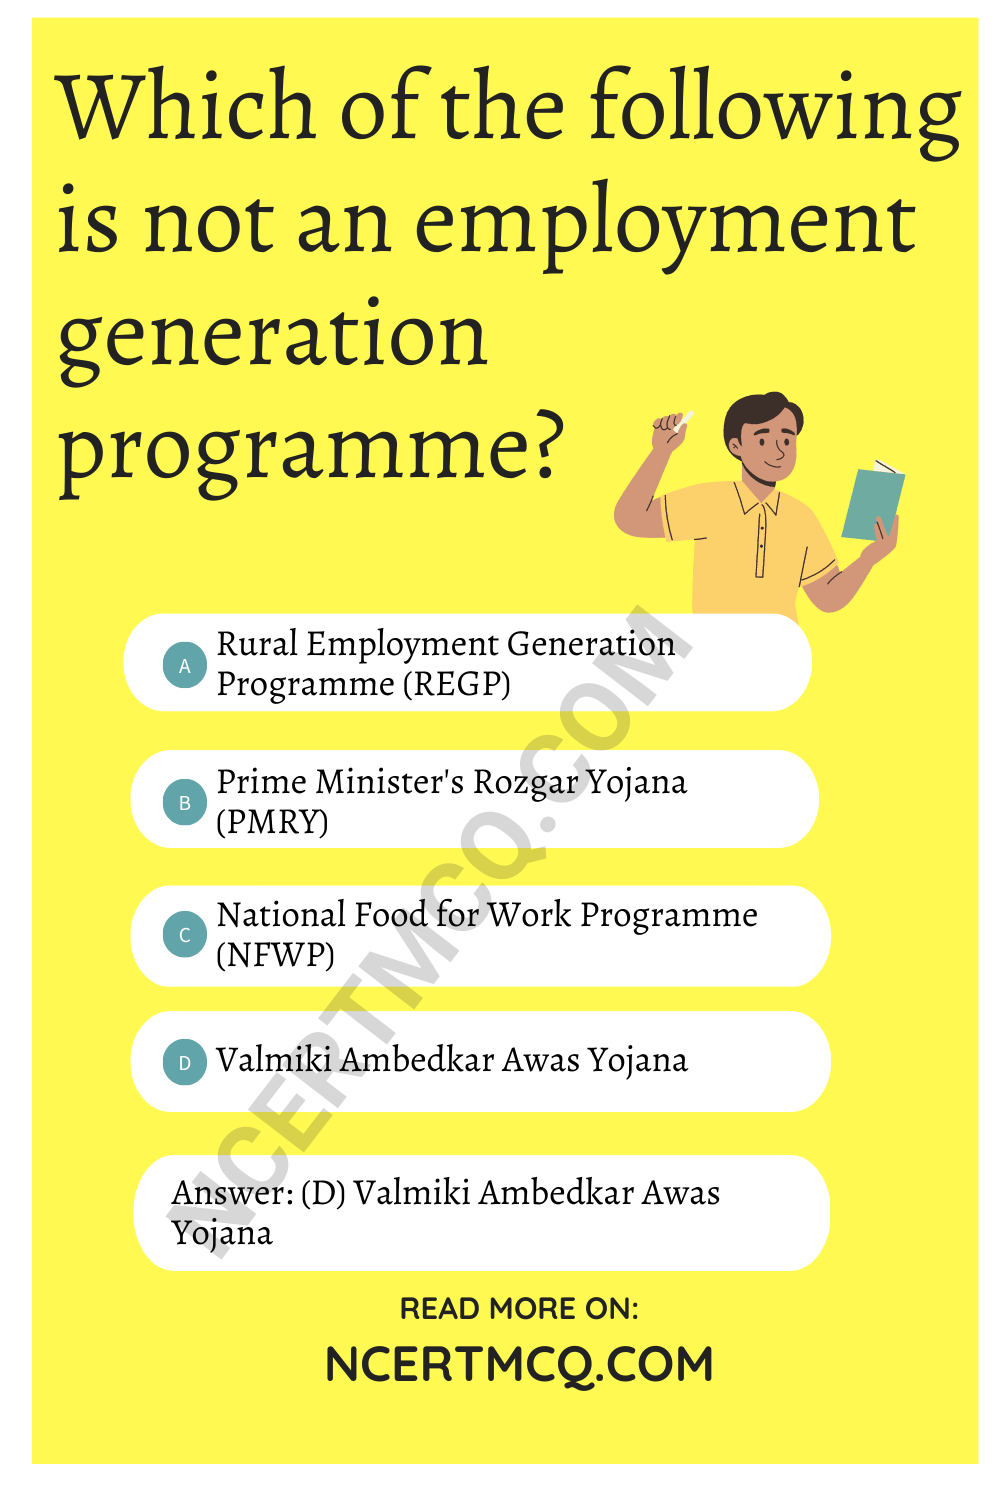 Which of the following is not an employment generation programme?